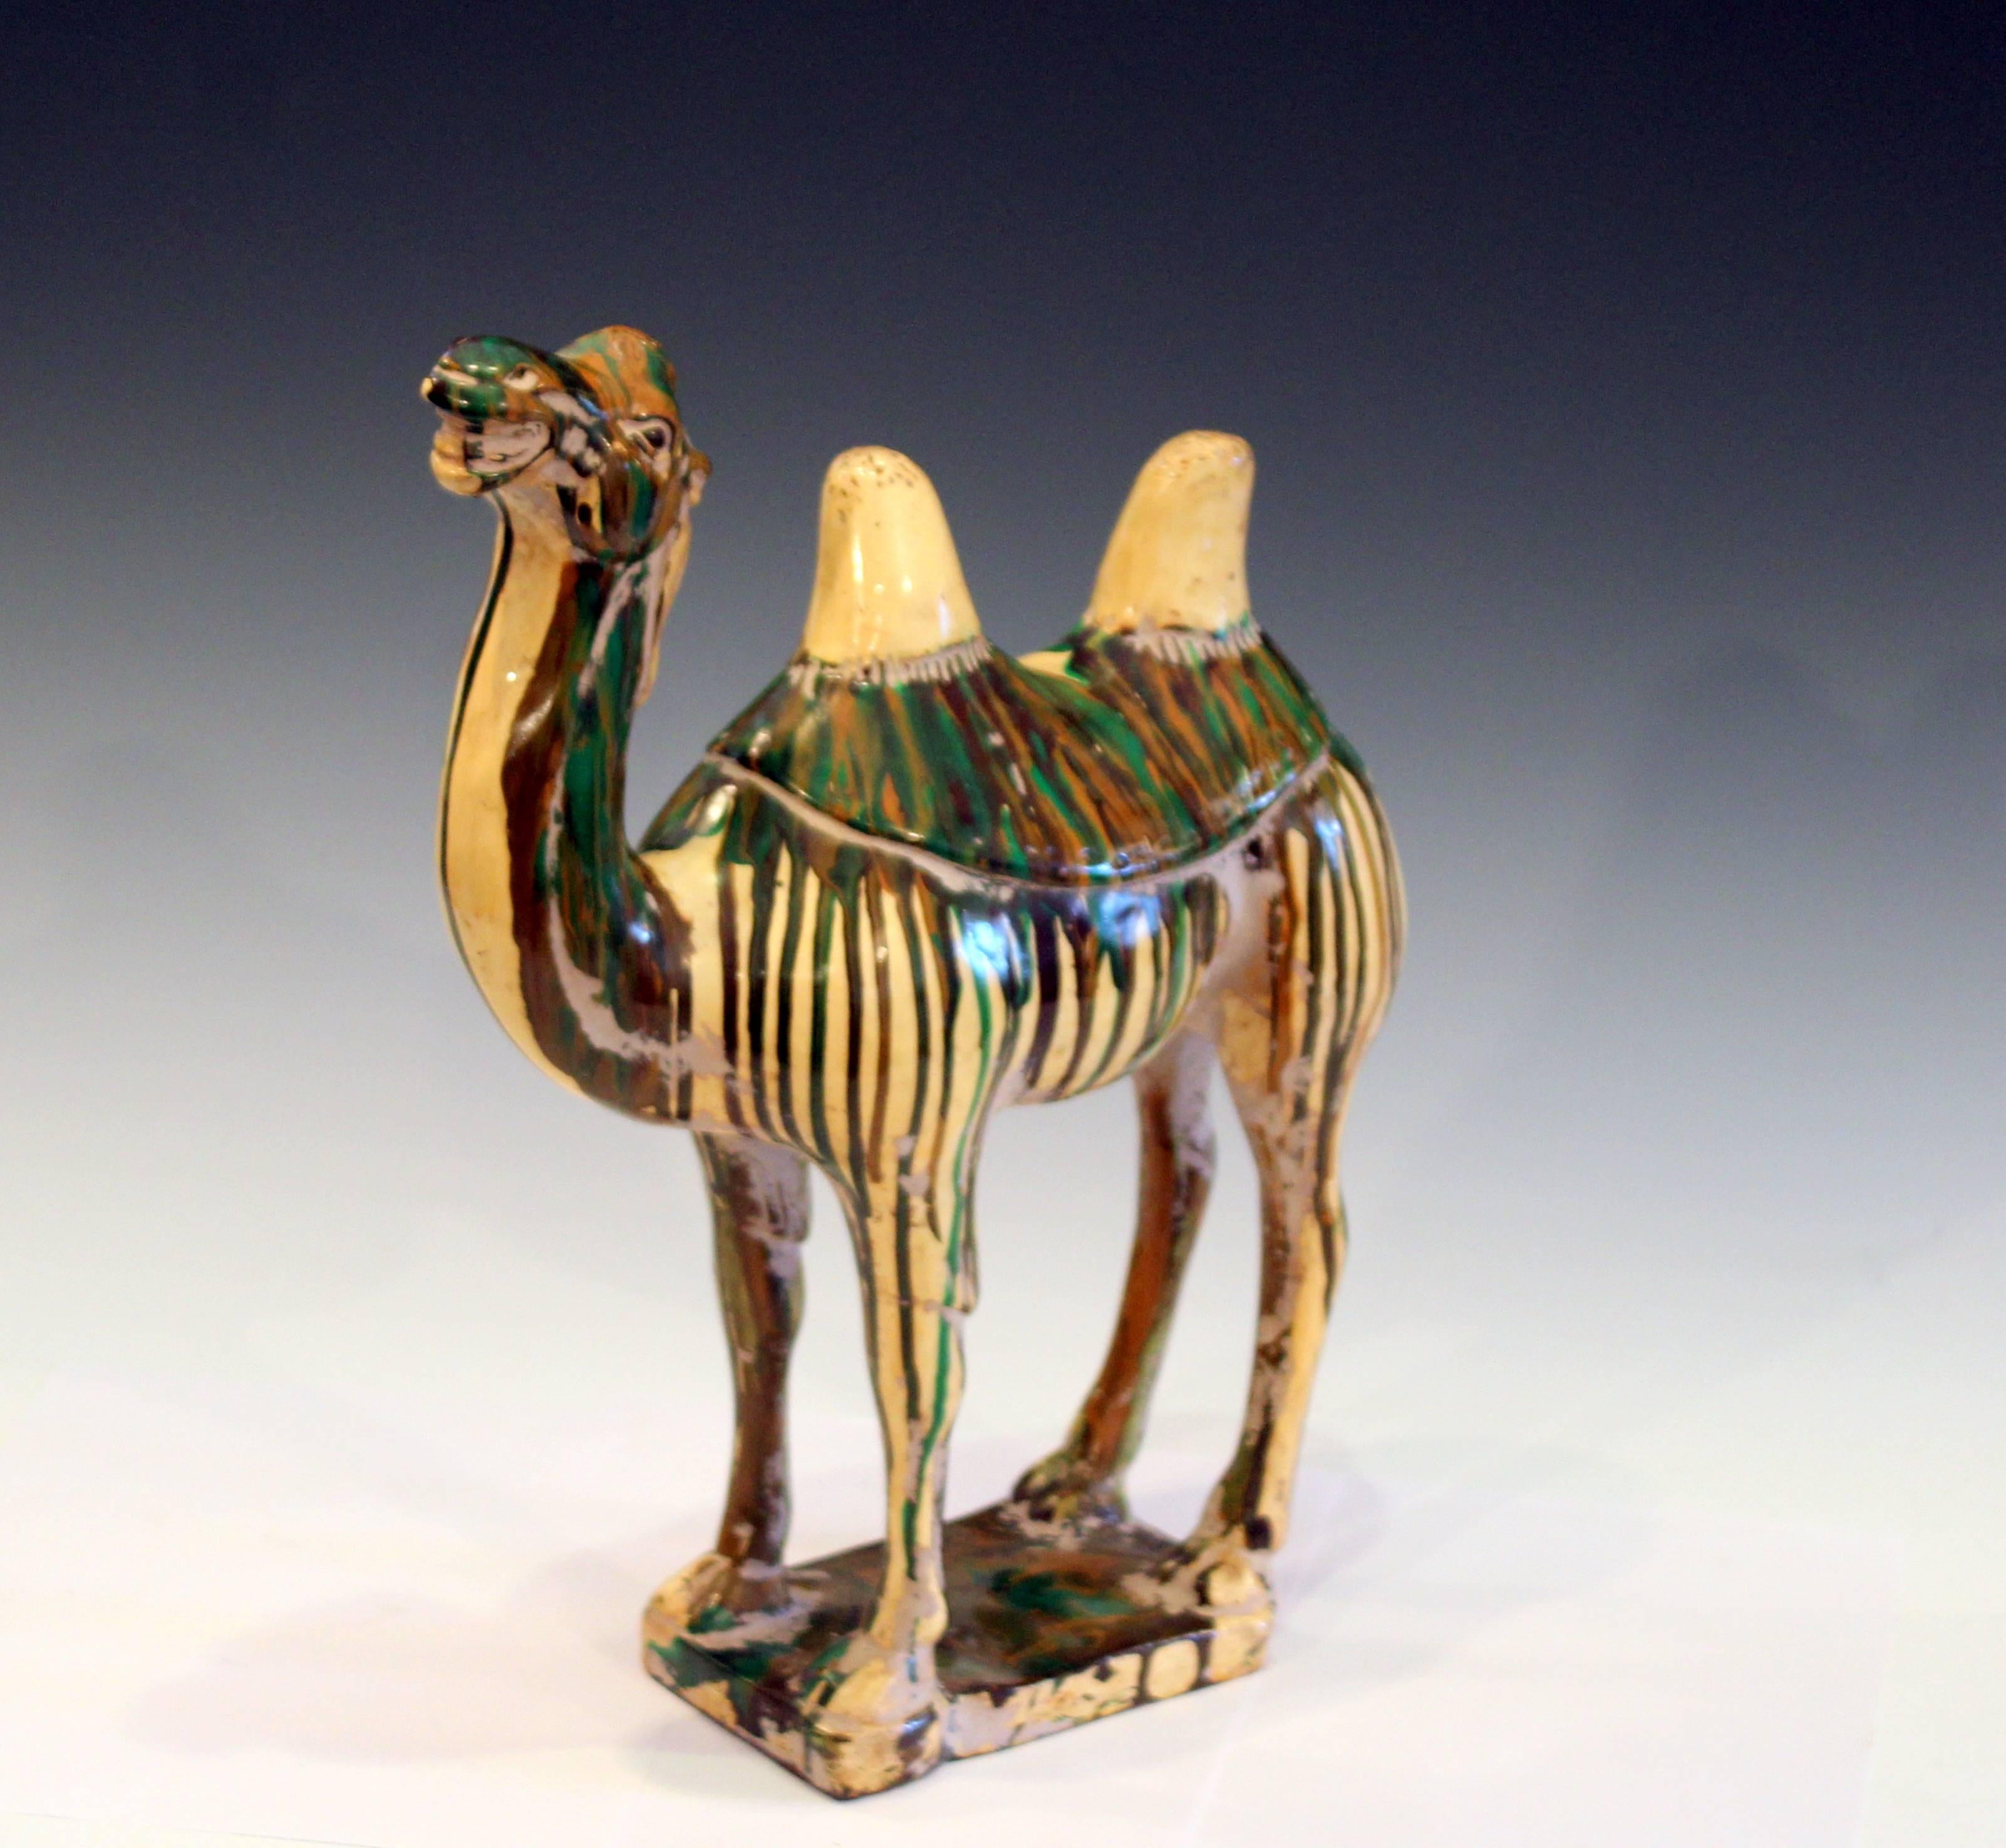 Vintage Tang Style Folk Art Pottery Two Hump Camel Figure Sculpture, 1960s In Excellent Condition For Sale In Wilton, CT